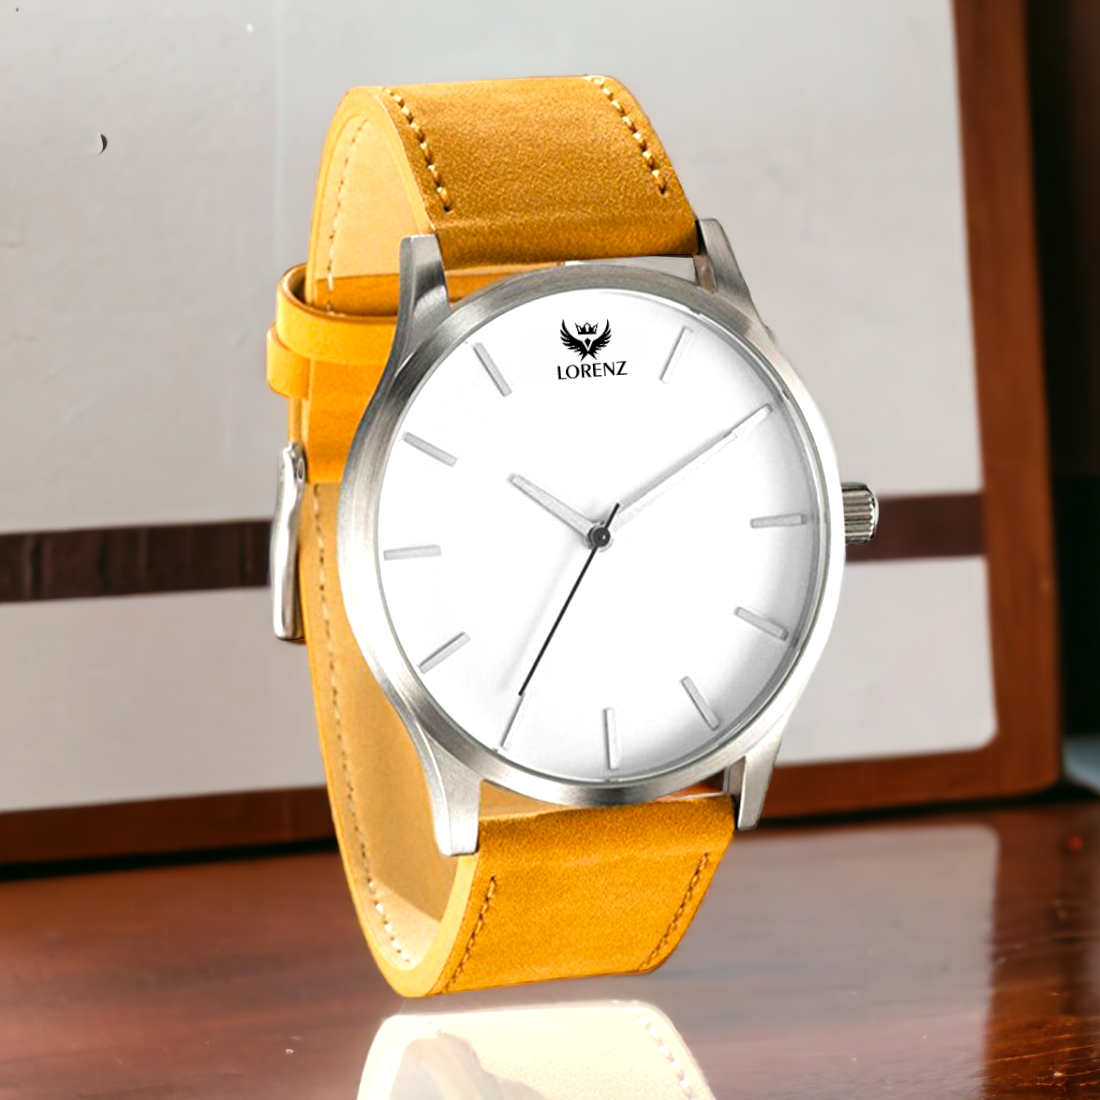 Lorenz MK-1055A White Dial Corporate Look Casual Fit Analog Watch